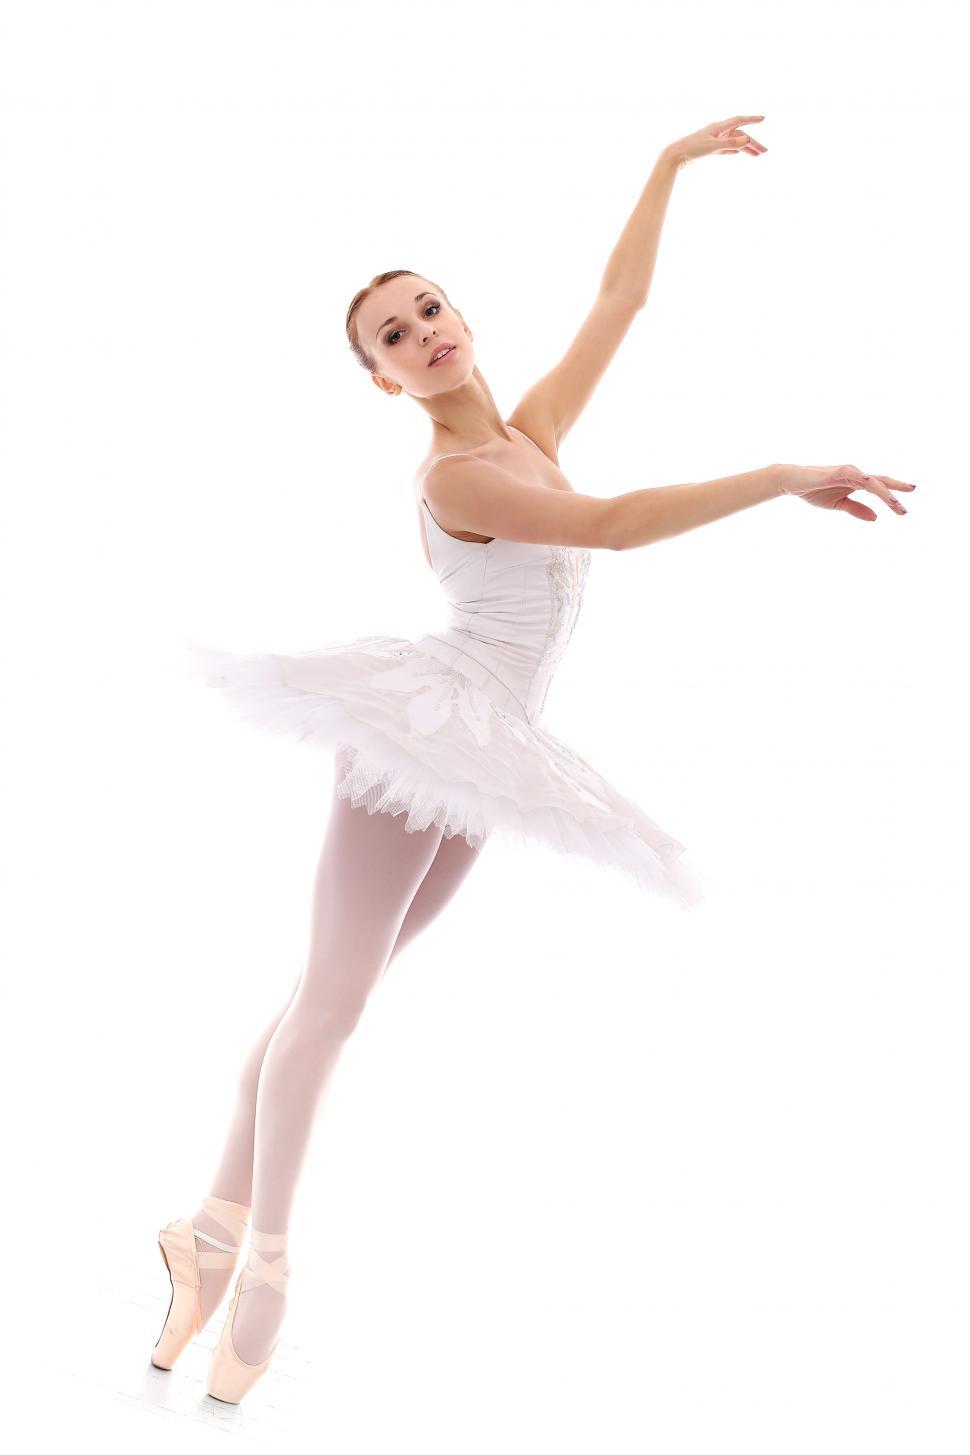 Download Free Stock Photo of Lovely ballerina dancing against white background 